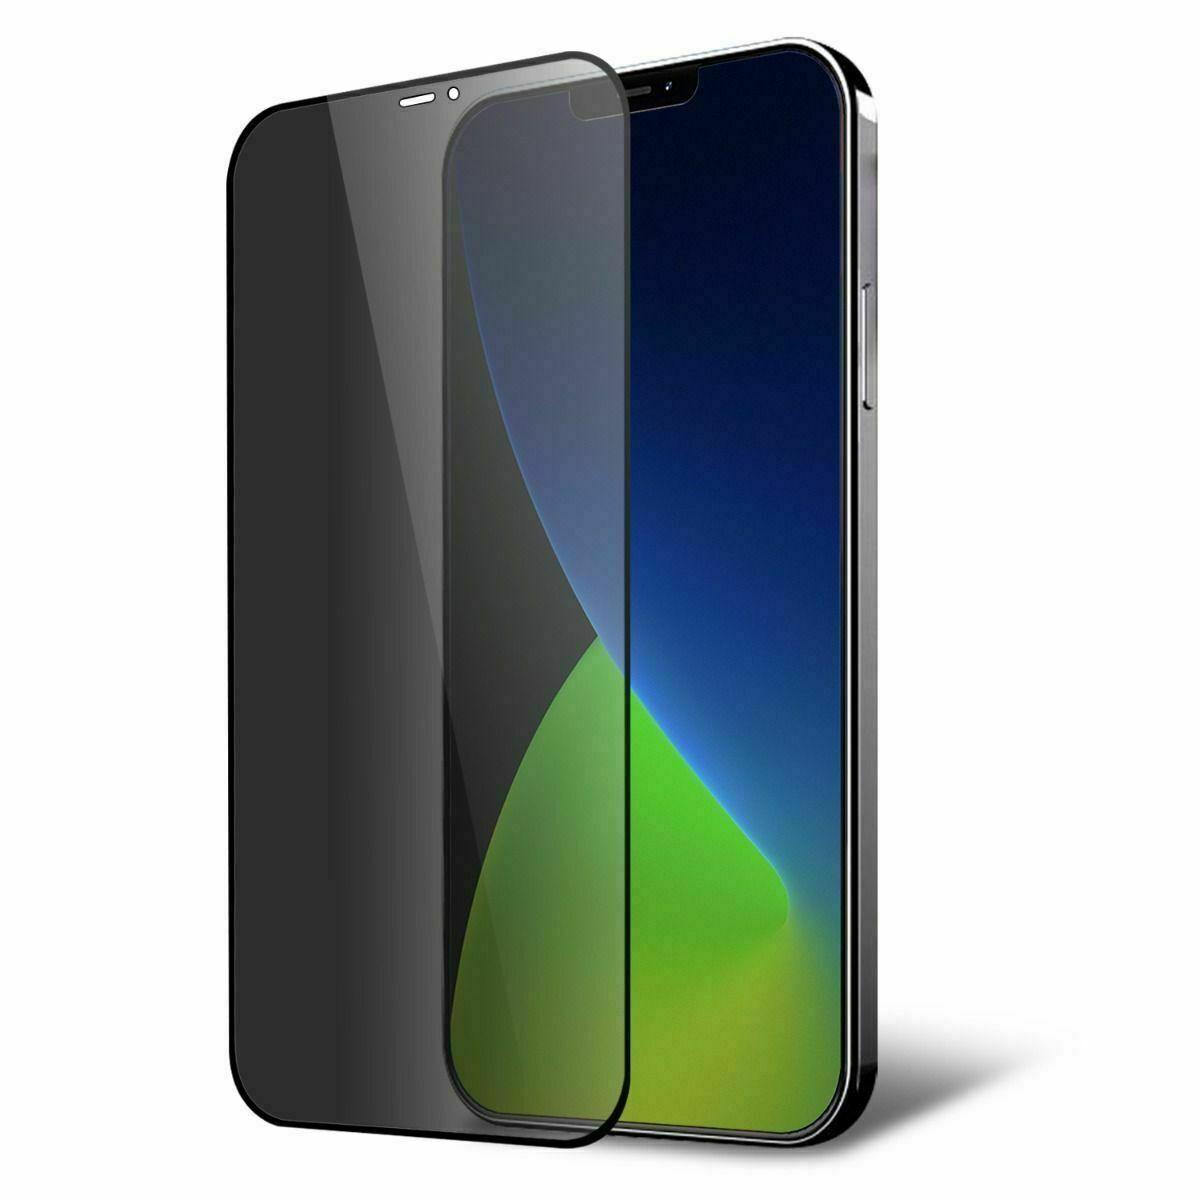 5D Privacy Tempered Glass Screen Protector For iPhone X/XS - mobilecasesonline